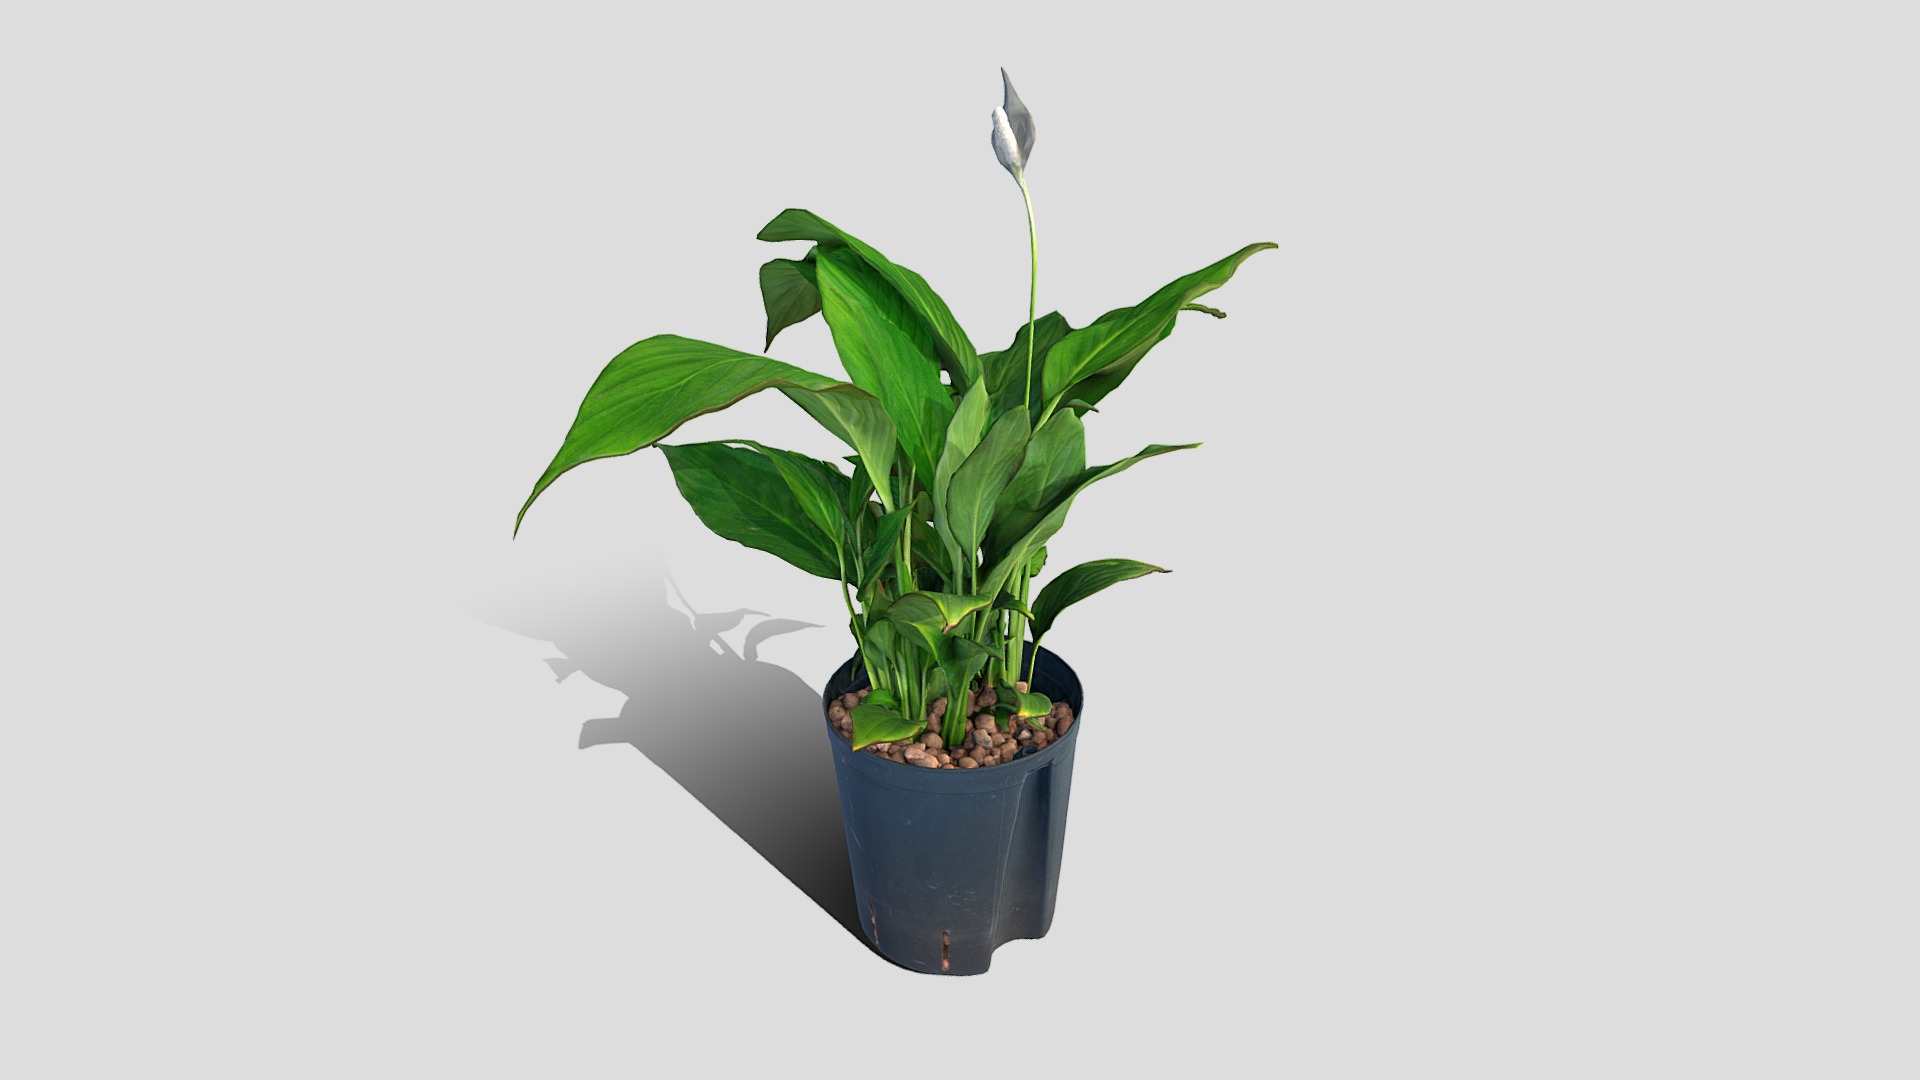 3D model 000030_Spathiphyllum - This is a 3D model of the 000030_Spathiphyllum. The 3D model is about a plant in a pot.